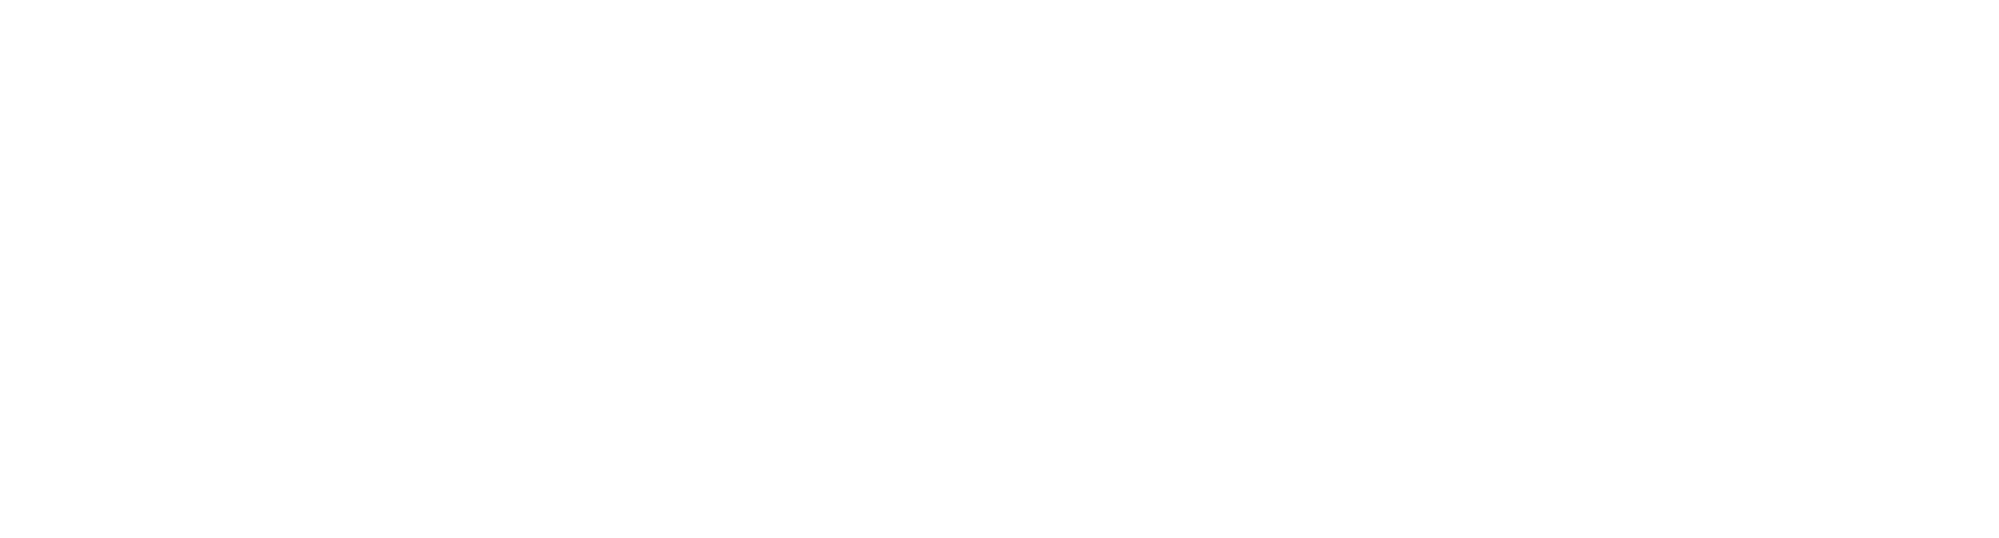 Ethnic Communities Council of NSW